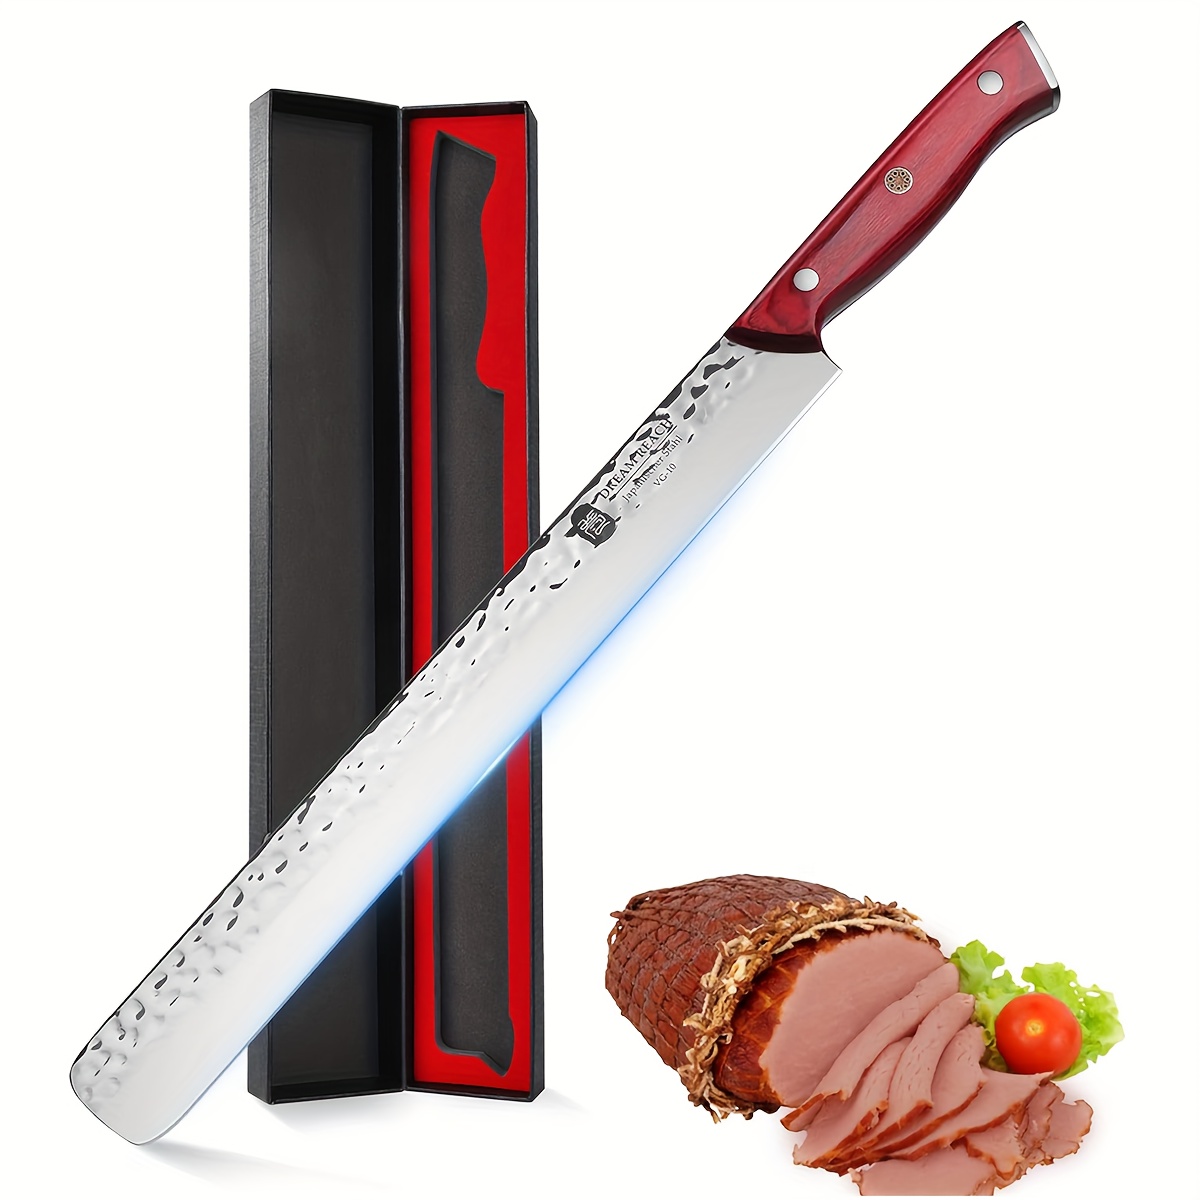 

Vg10 Slicing Knife, 12 Inch Japanese Carving Knife Ultra Sharp Forged High Carbon Stainless Steel Long Brisket Knife For Meat Cutting Bbq Full Tang Kitchen Knives Ergonomic Handle Gift Box